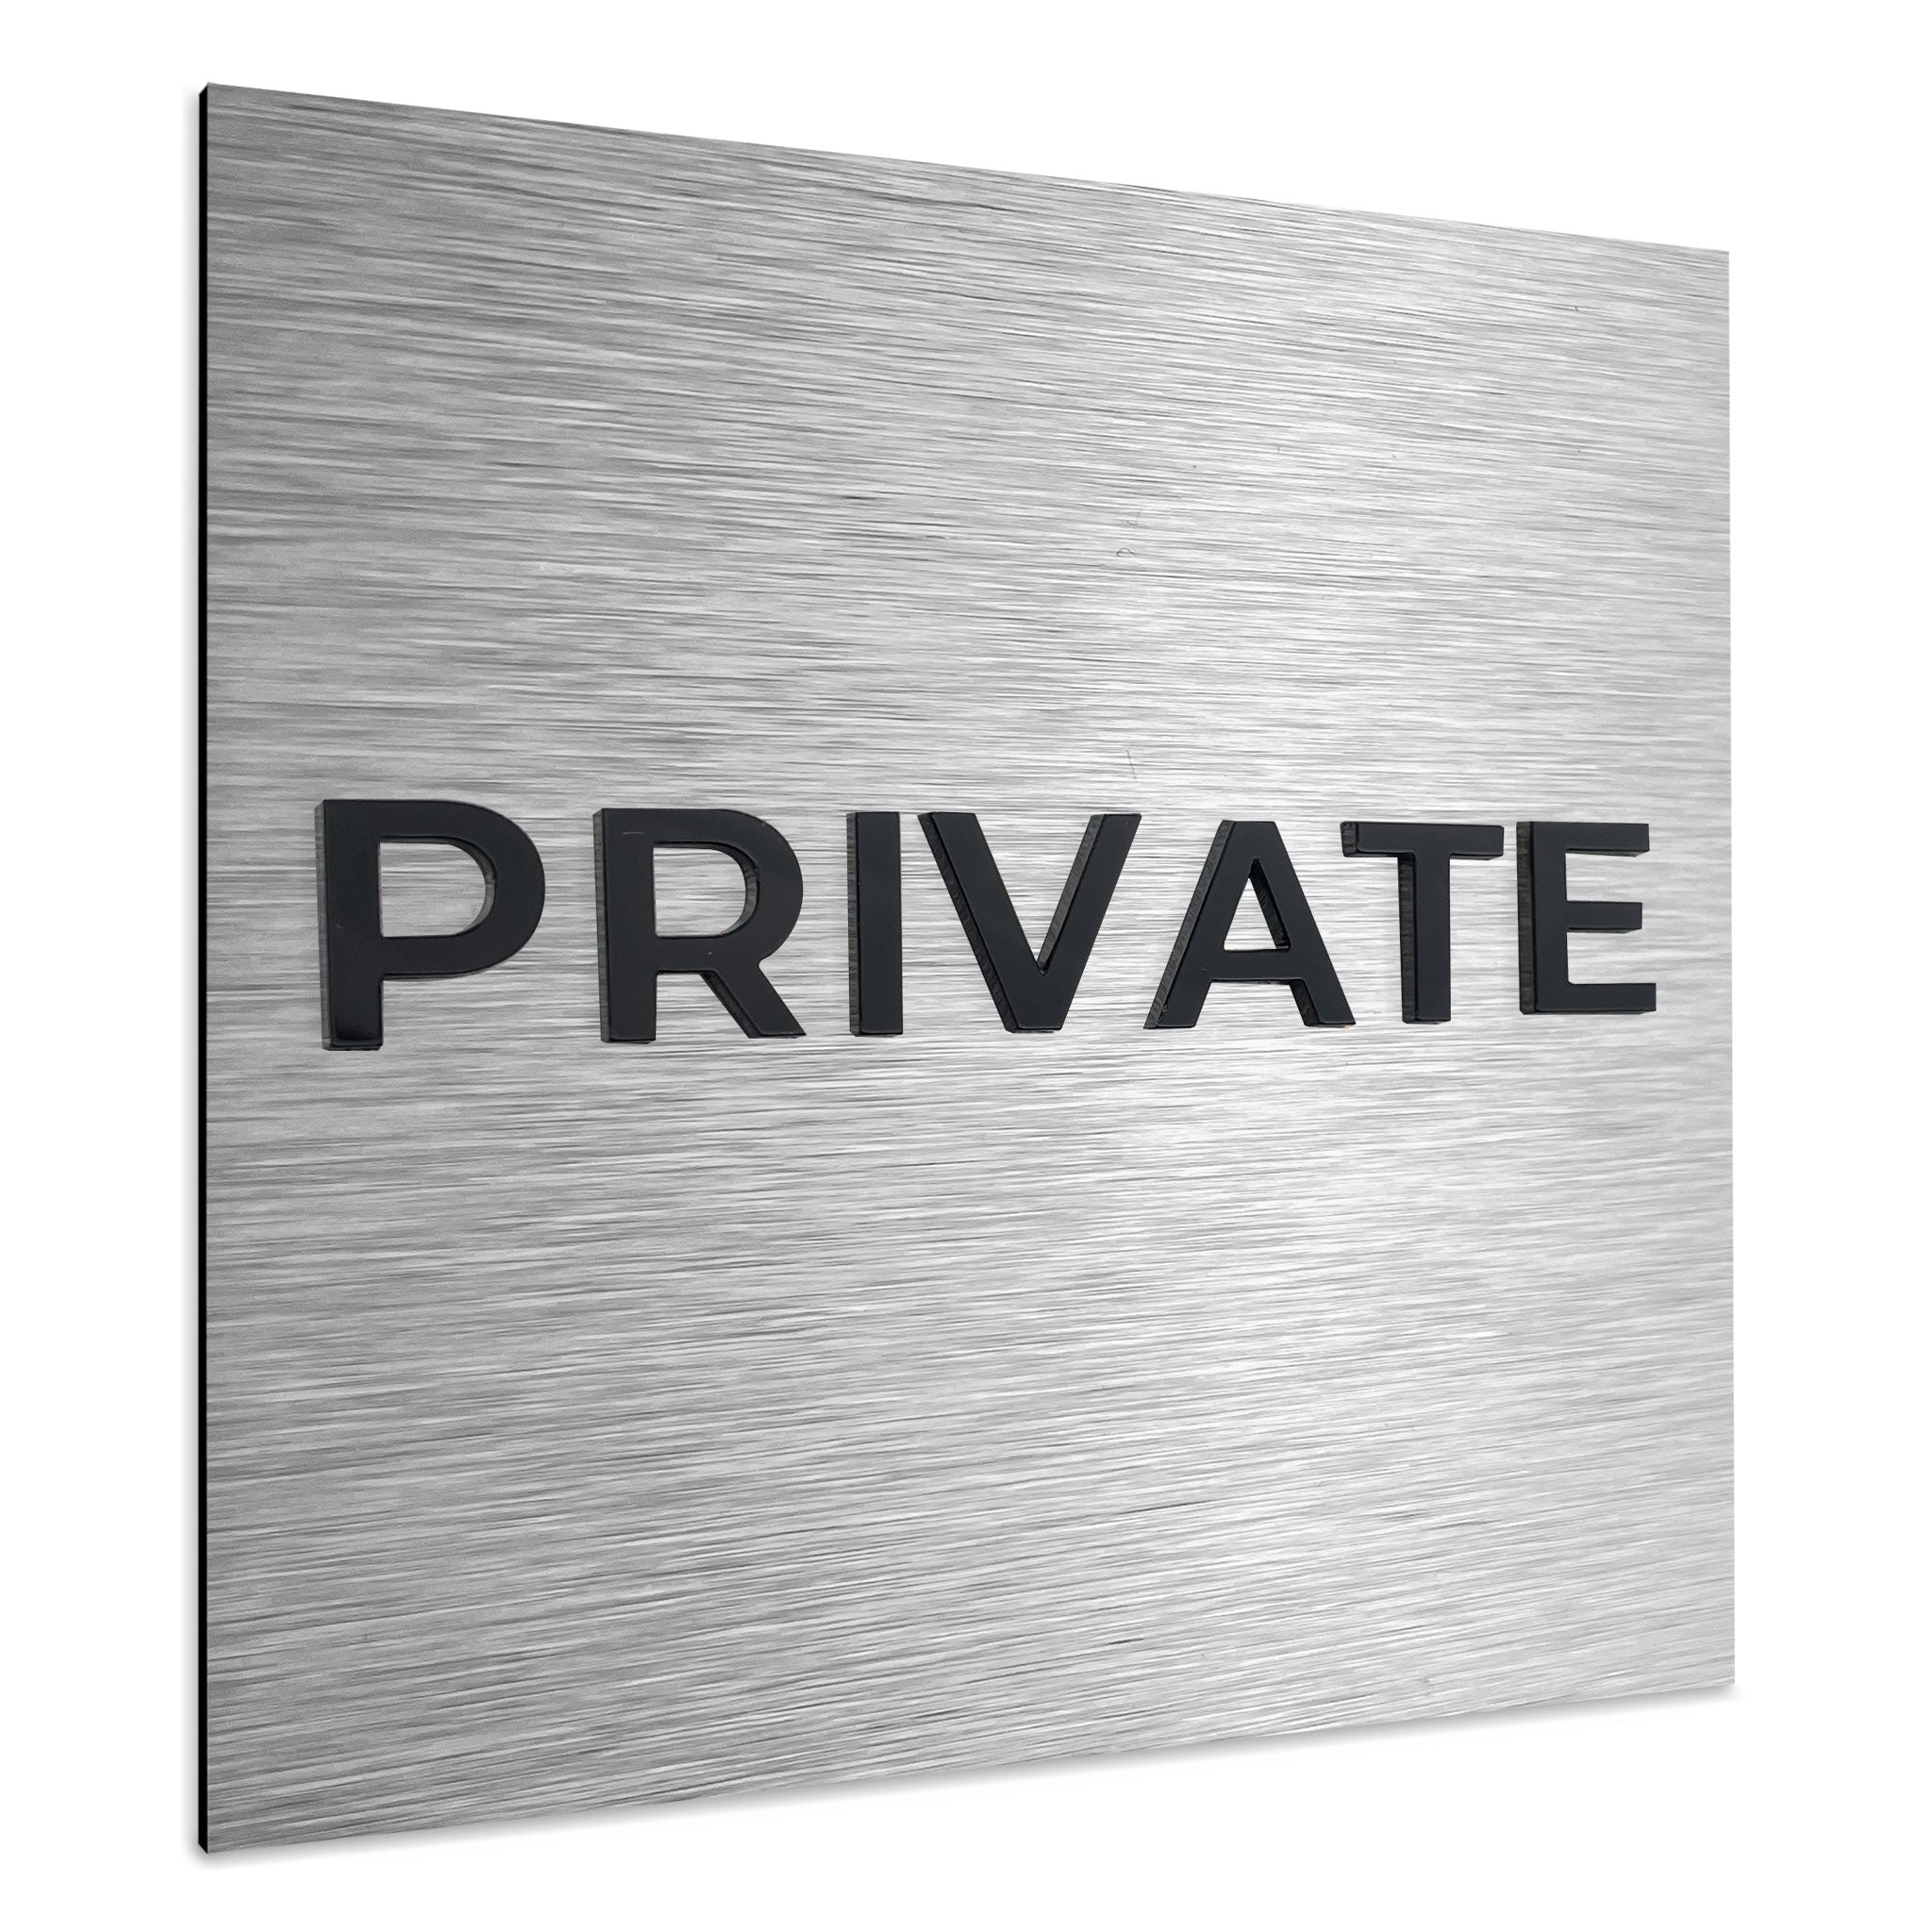 PRIVATE ROOM SIGNAGE - ALUMADESIGNCO Door Signs - Custom Door Signs For Business & Office